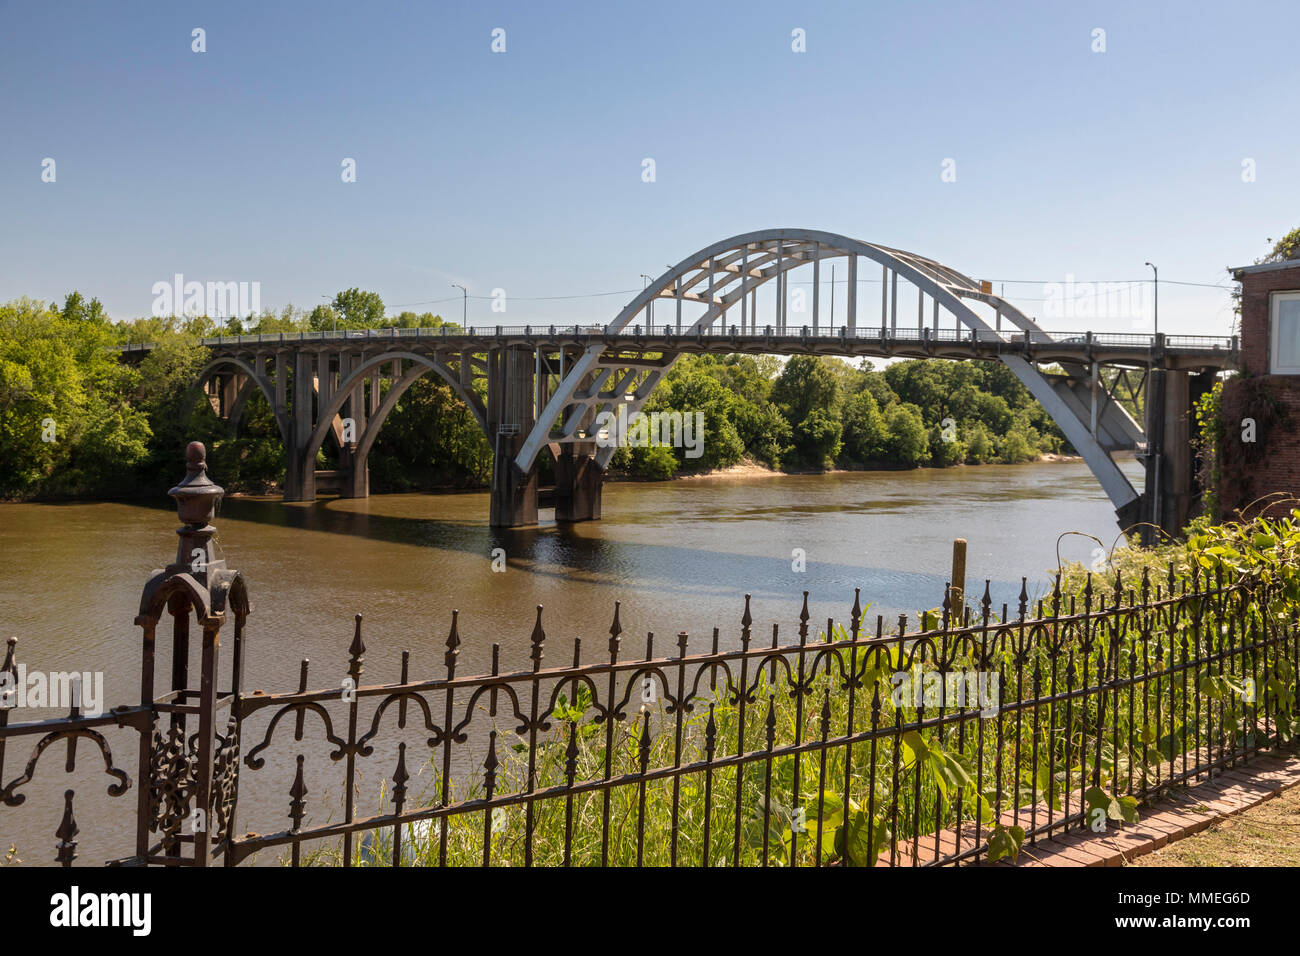 Selma, Alabama - The Edmund Pettus Bridge over the Alabama River, where civil rights demonstrators demanding the right to vote were badly beaten by sh Stock Photo